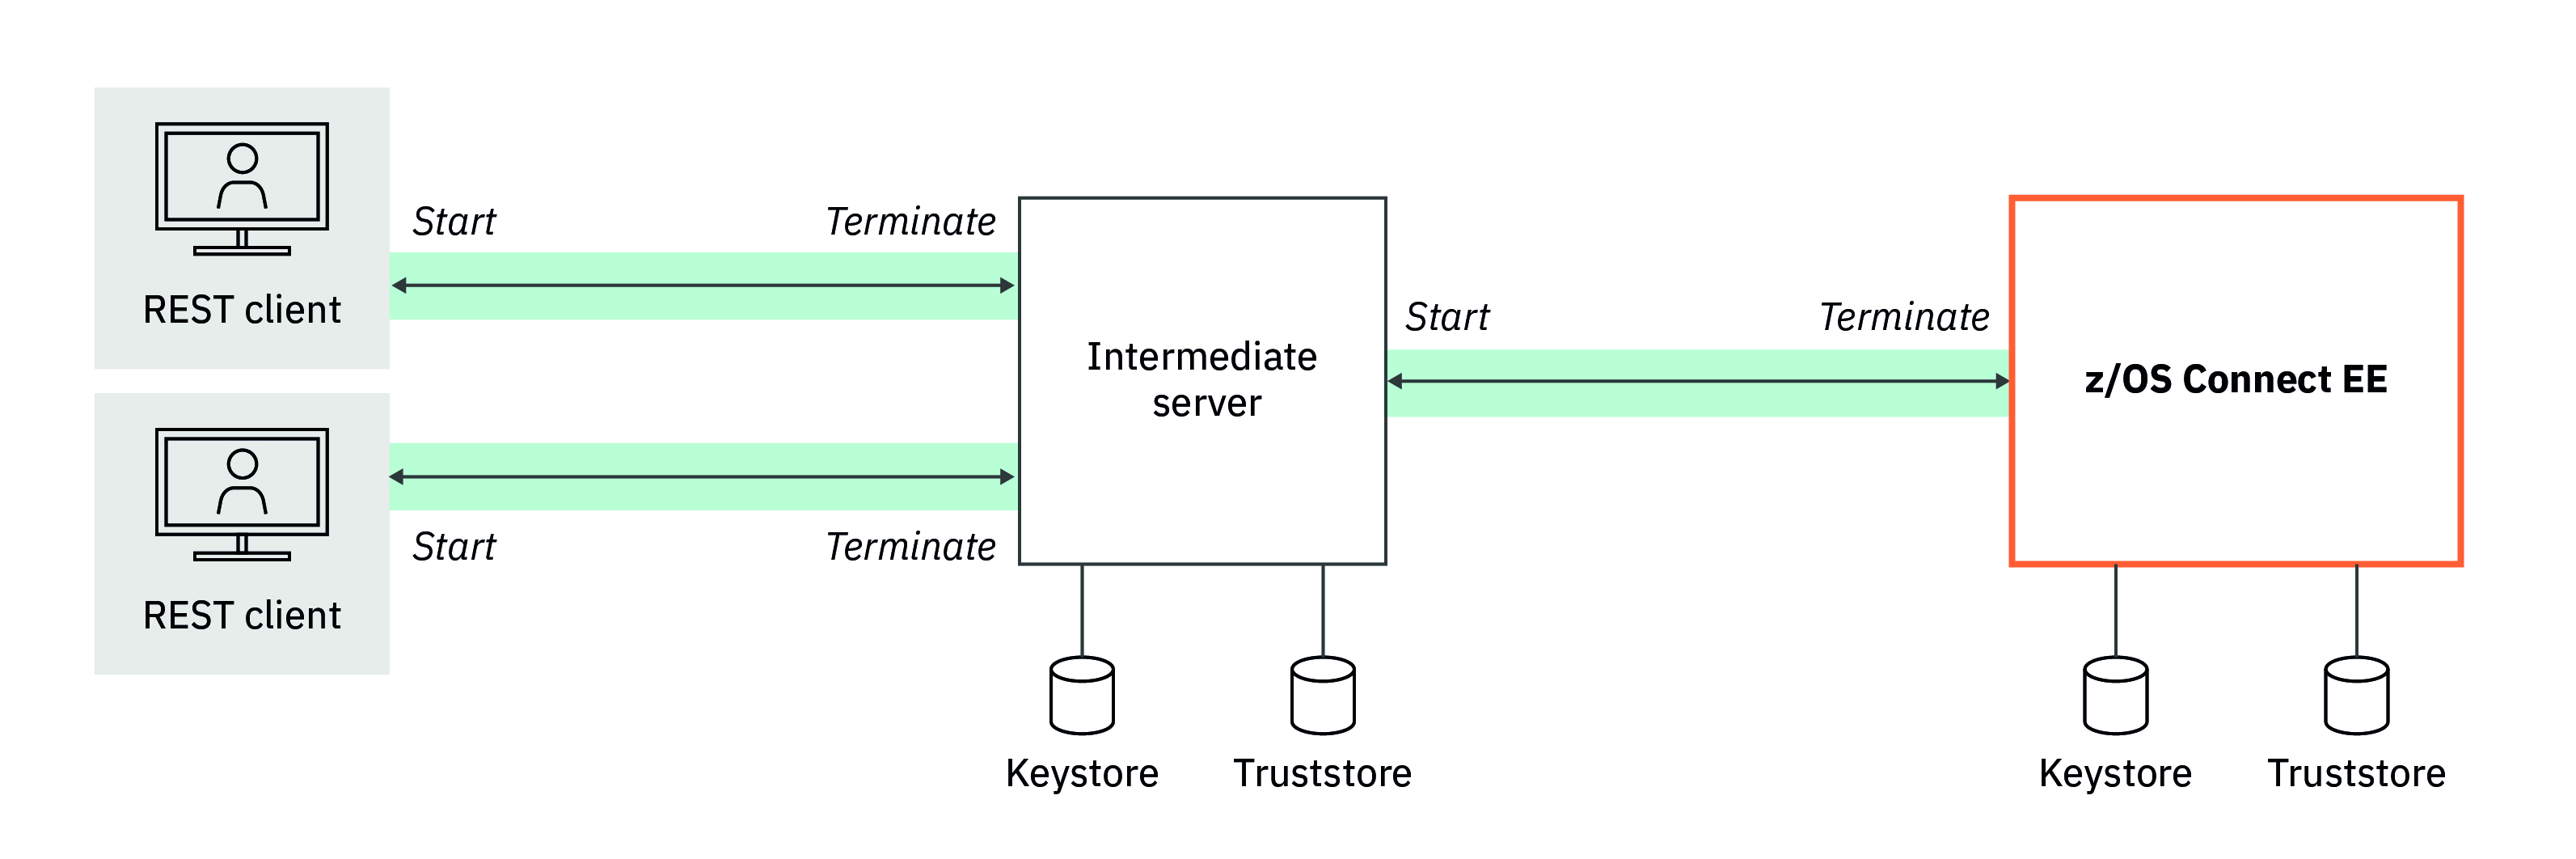 The intermediate server uses information from the keystore and truststore to verify the REST client when a connection is established.